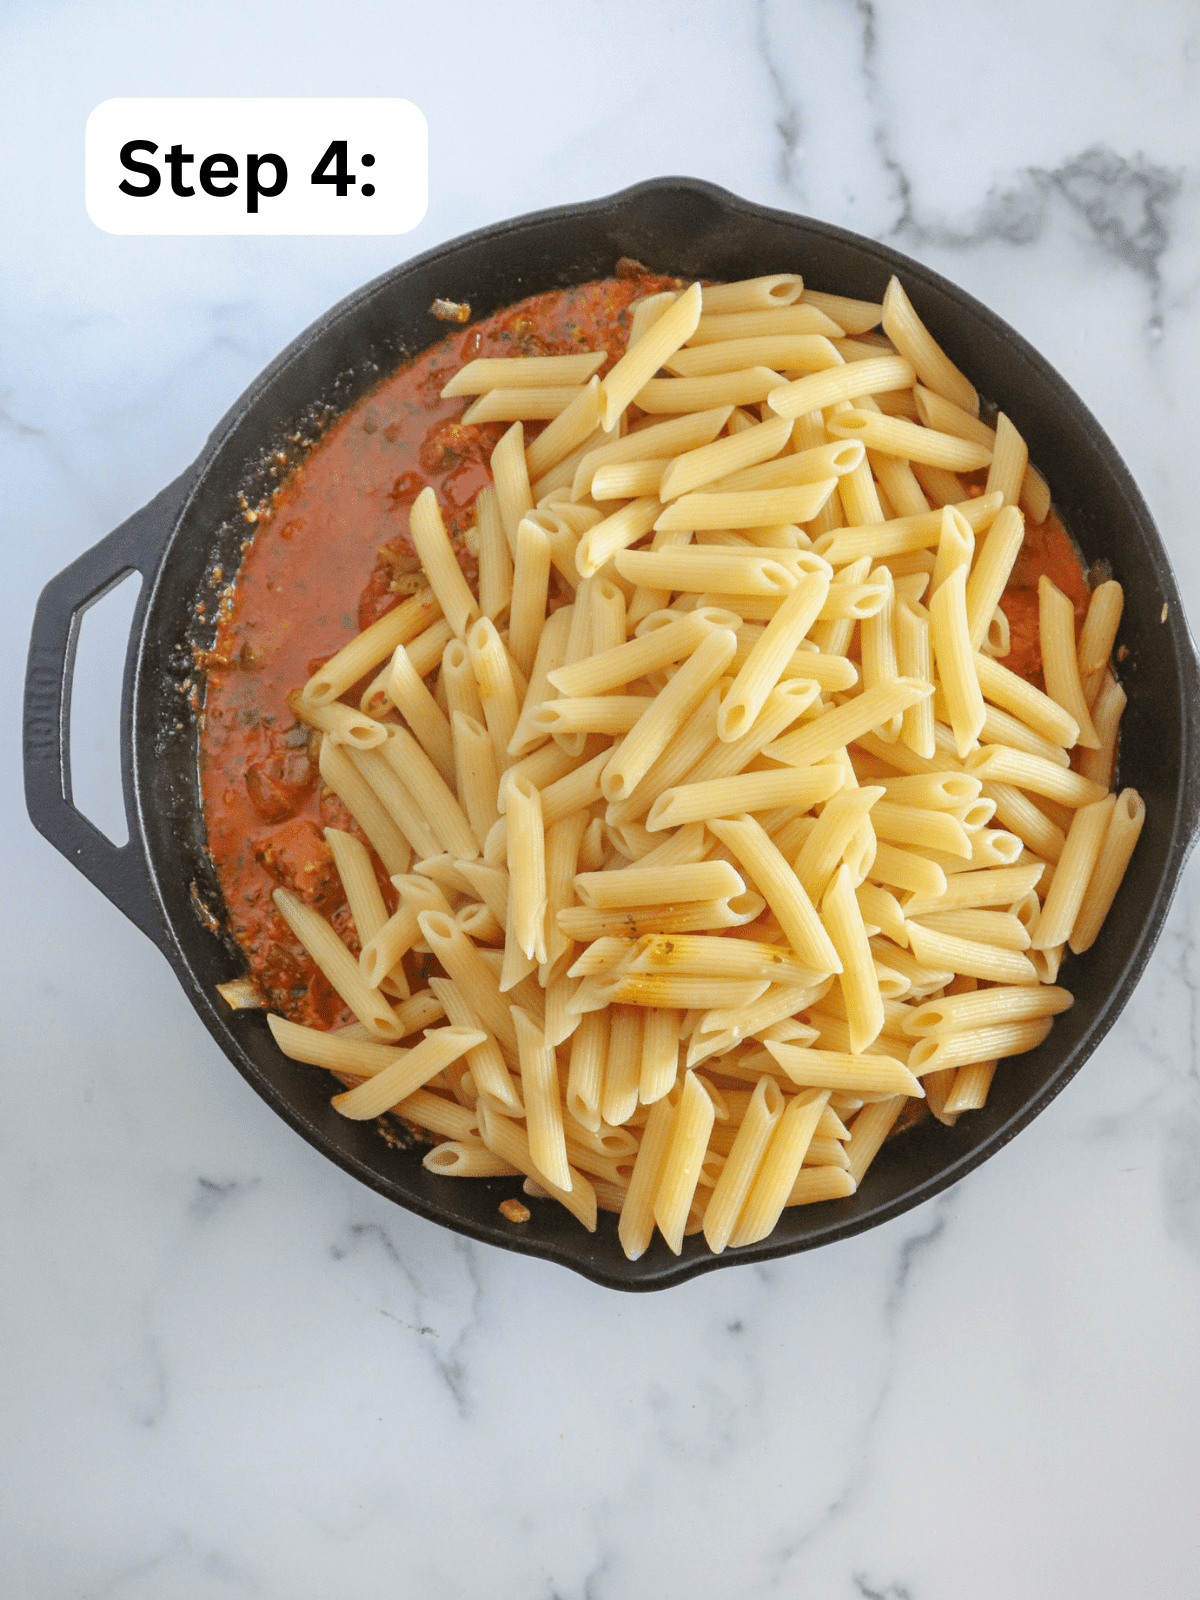 Skillet with noodles and sauce